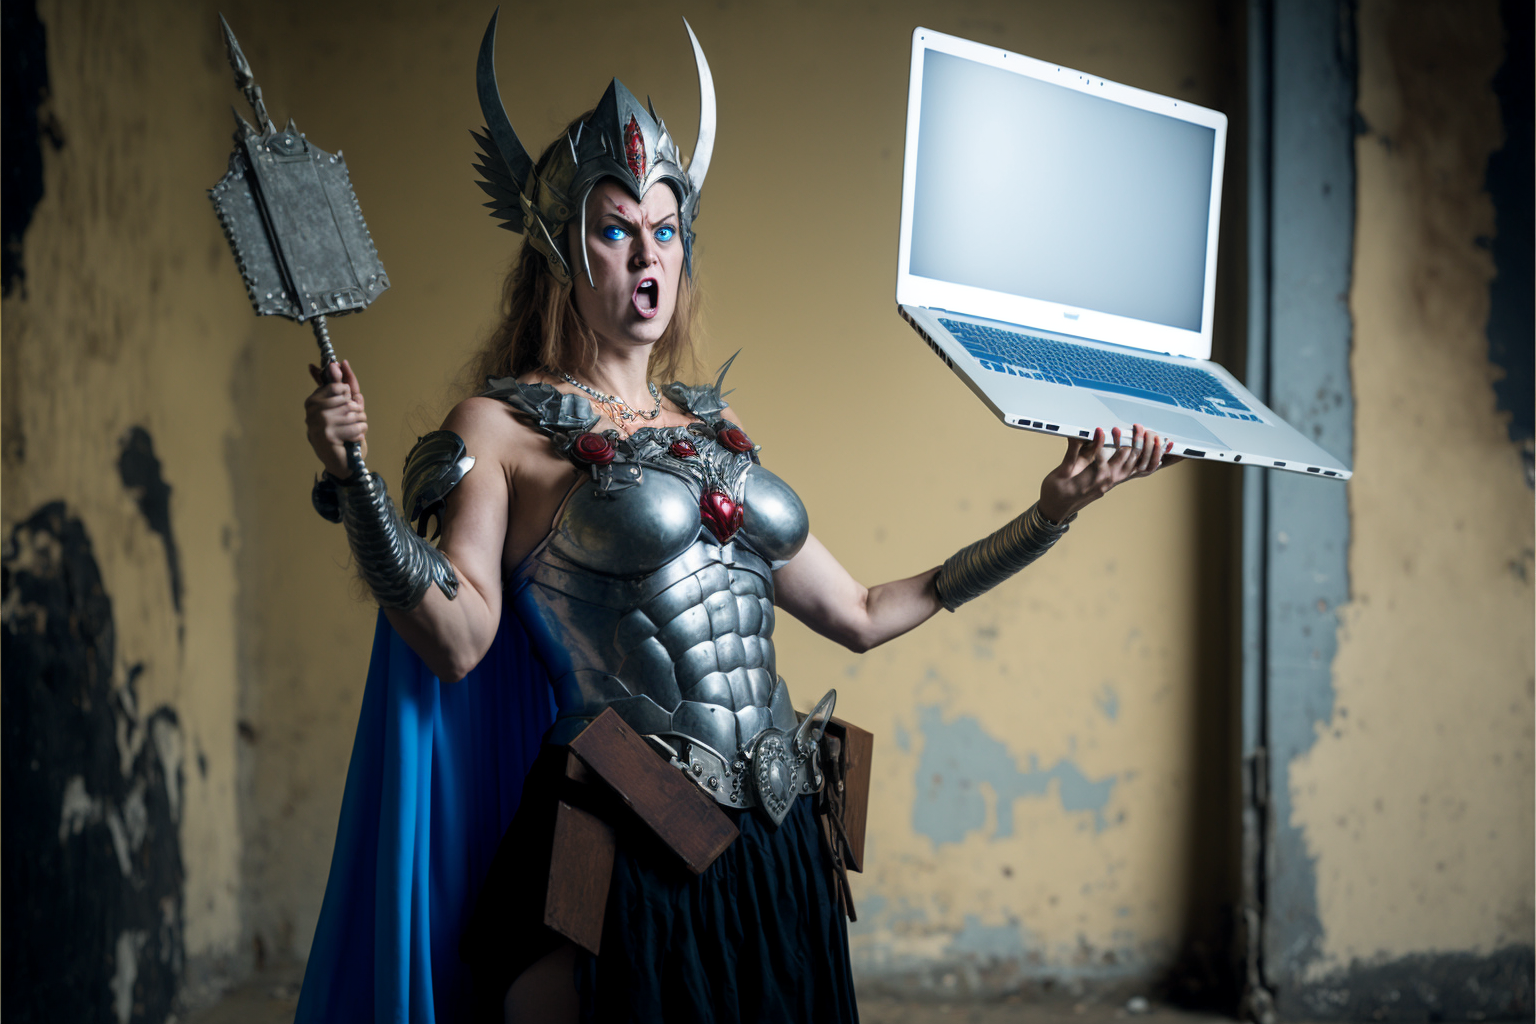 Why You Need Your Own Website as a Cosplay Model